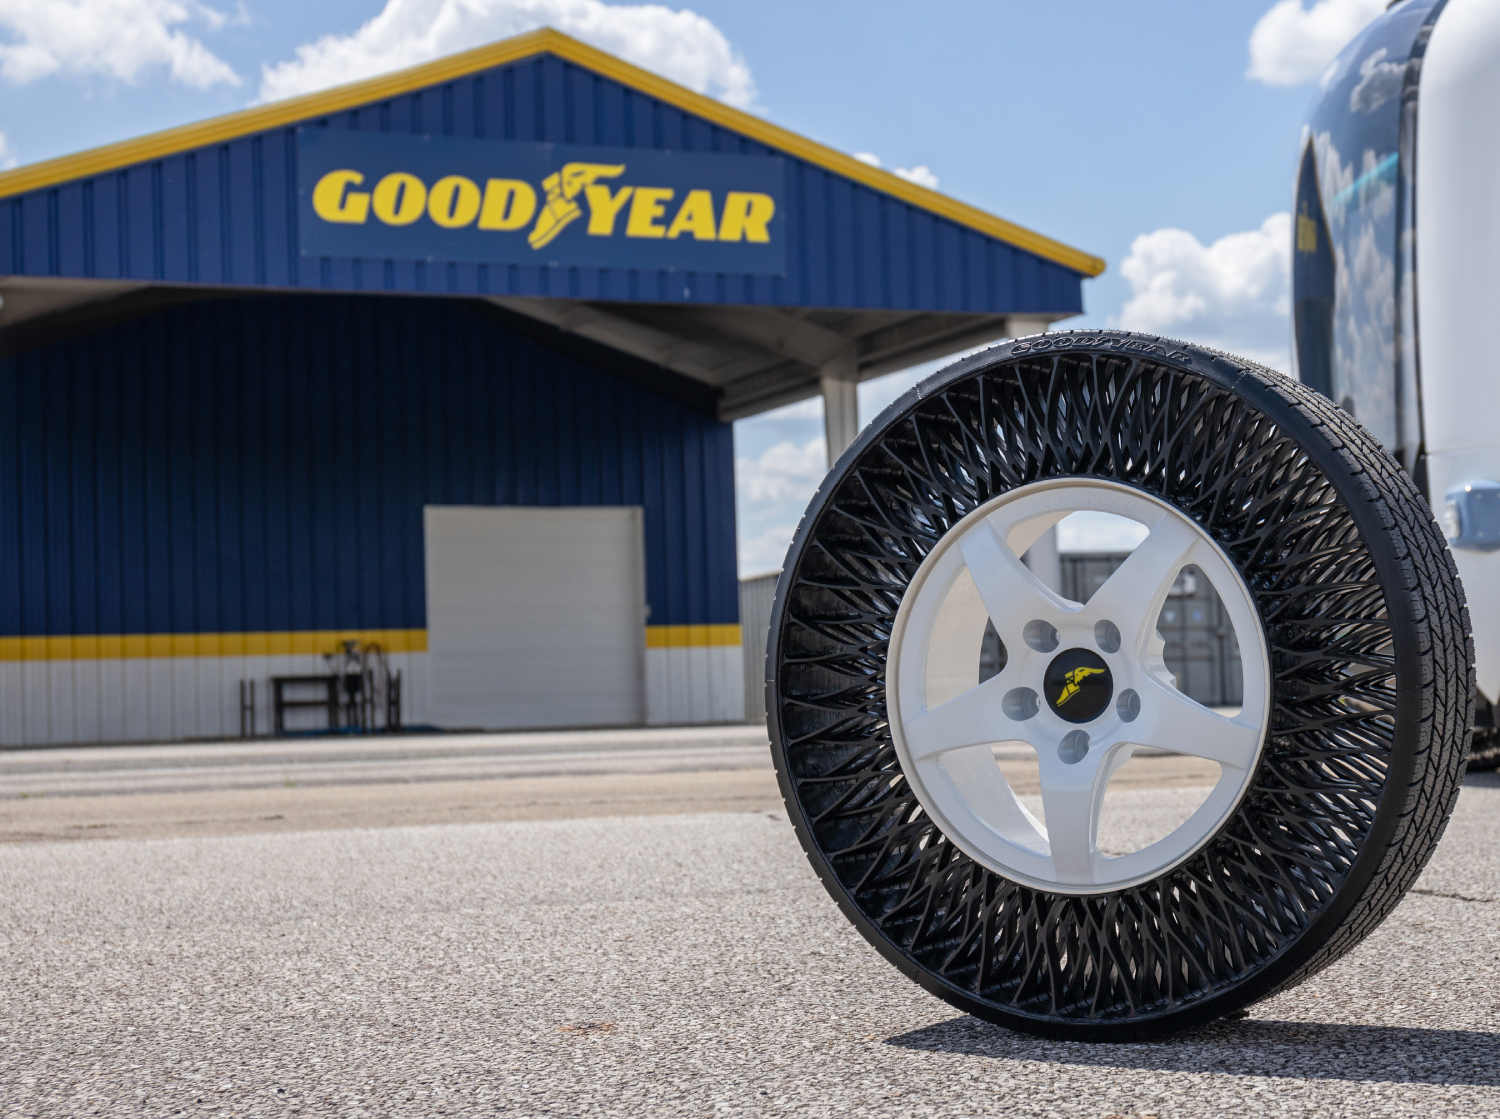 Goodyear Airless Tires